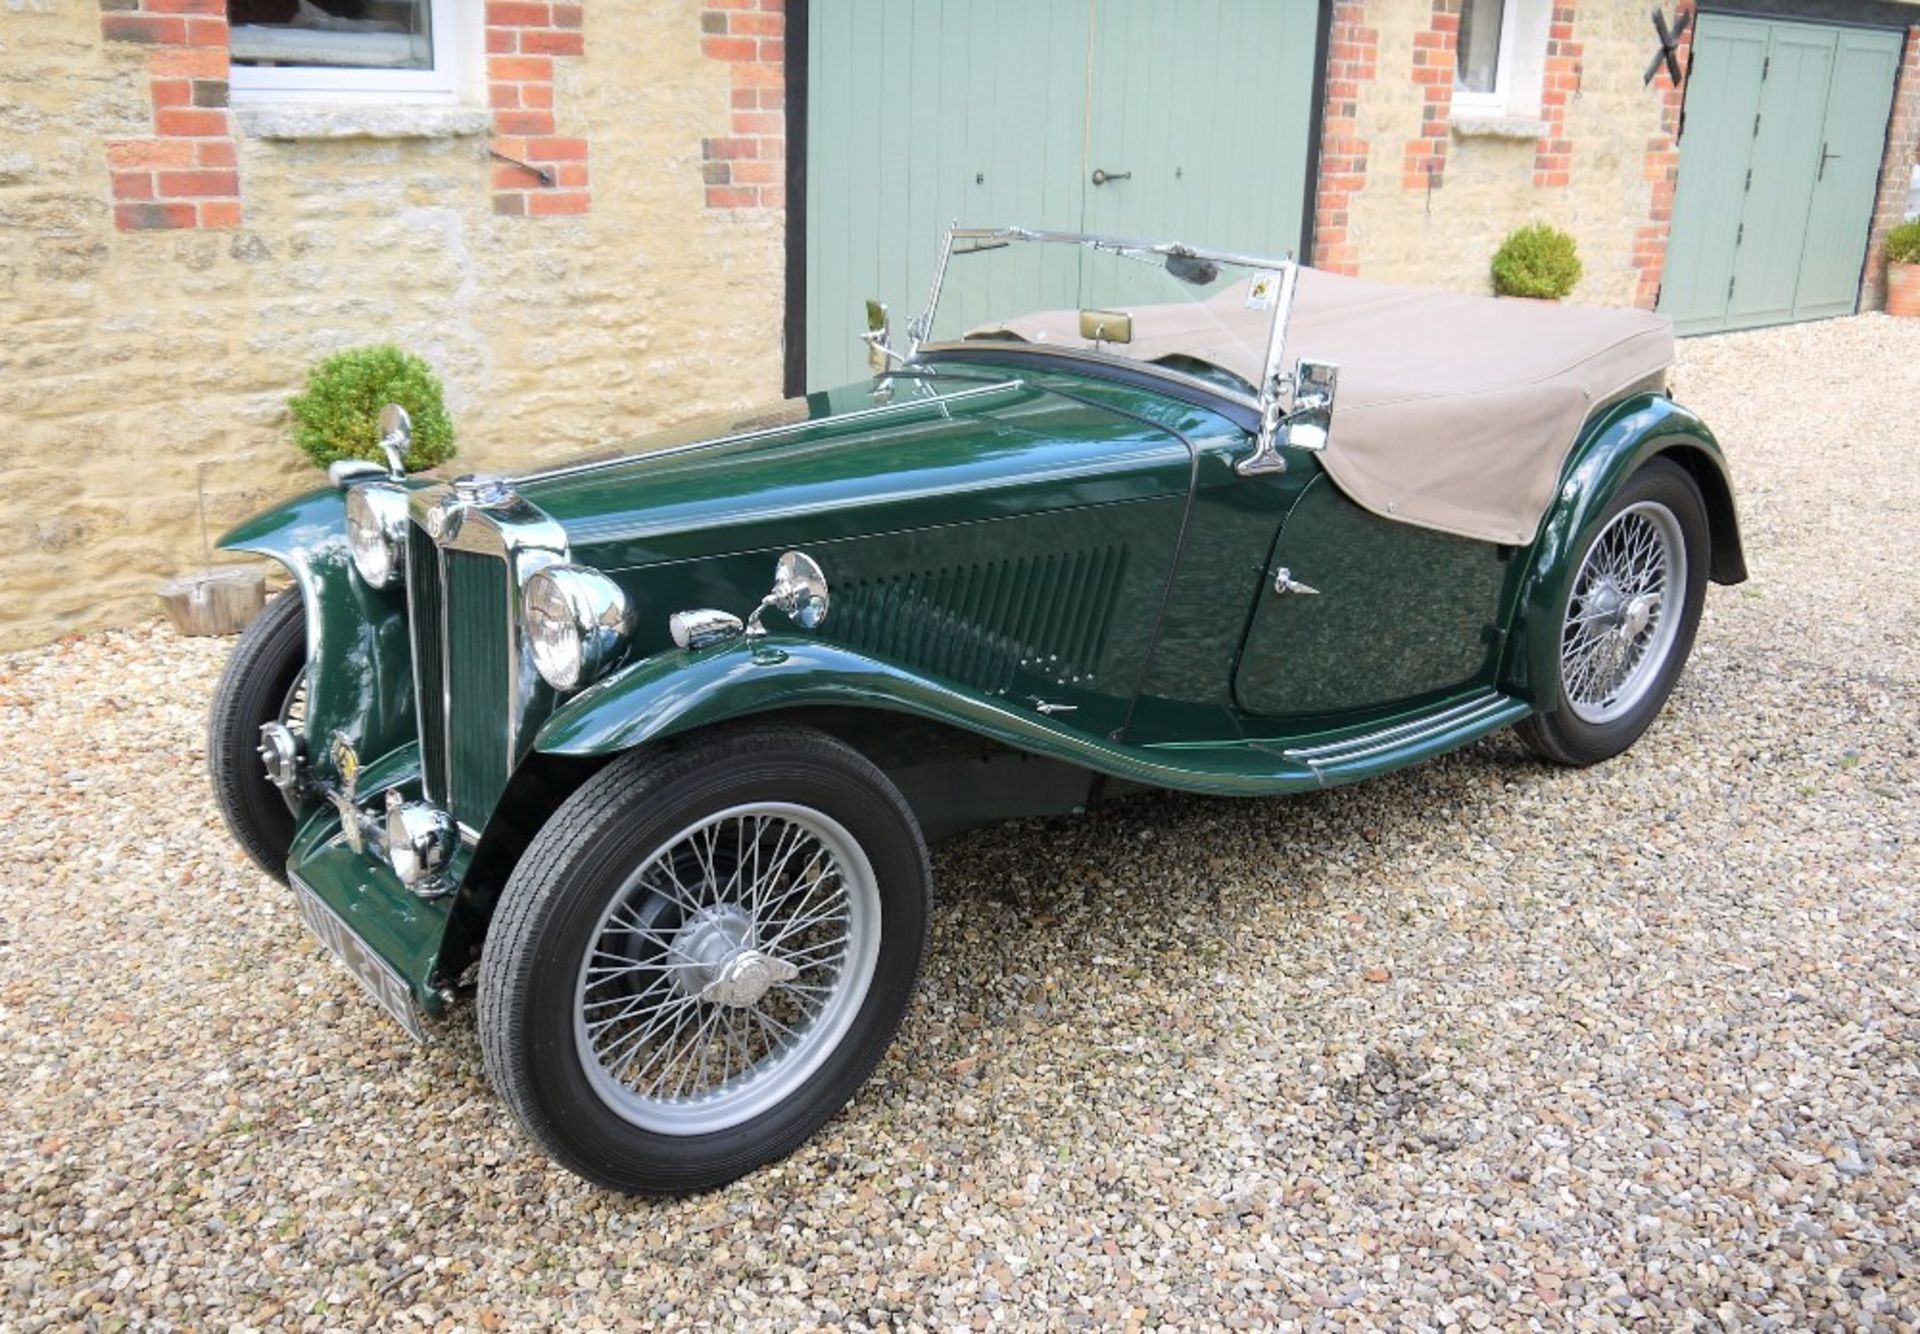 1949 MG TC 'MIDGET' Registration Number: XVV 276 Chassis number: TC 7712 Recorded Mileage: 40,700 - Image 2 of 21